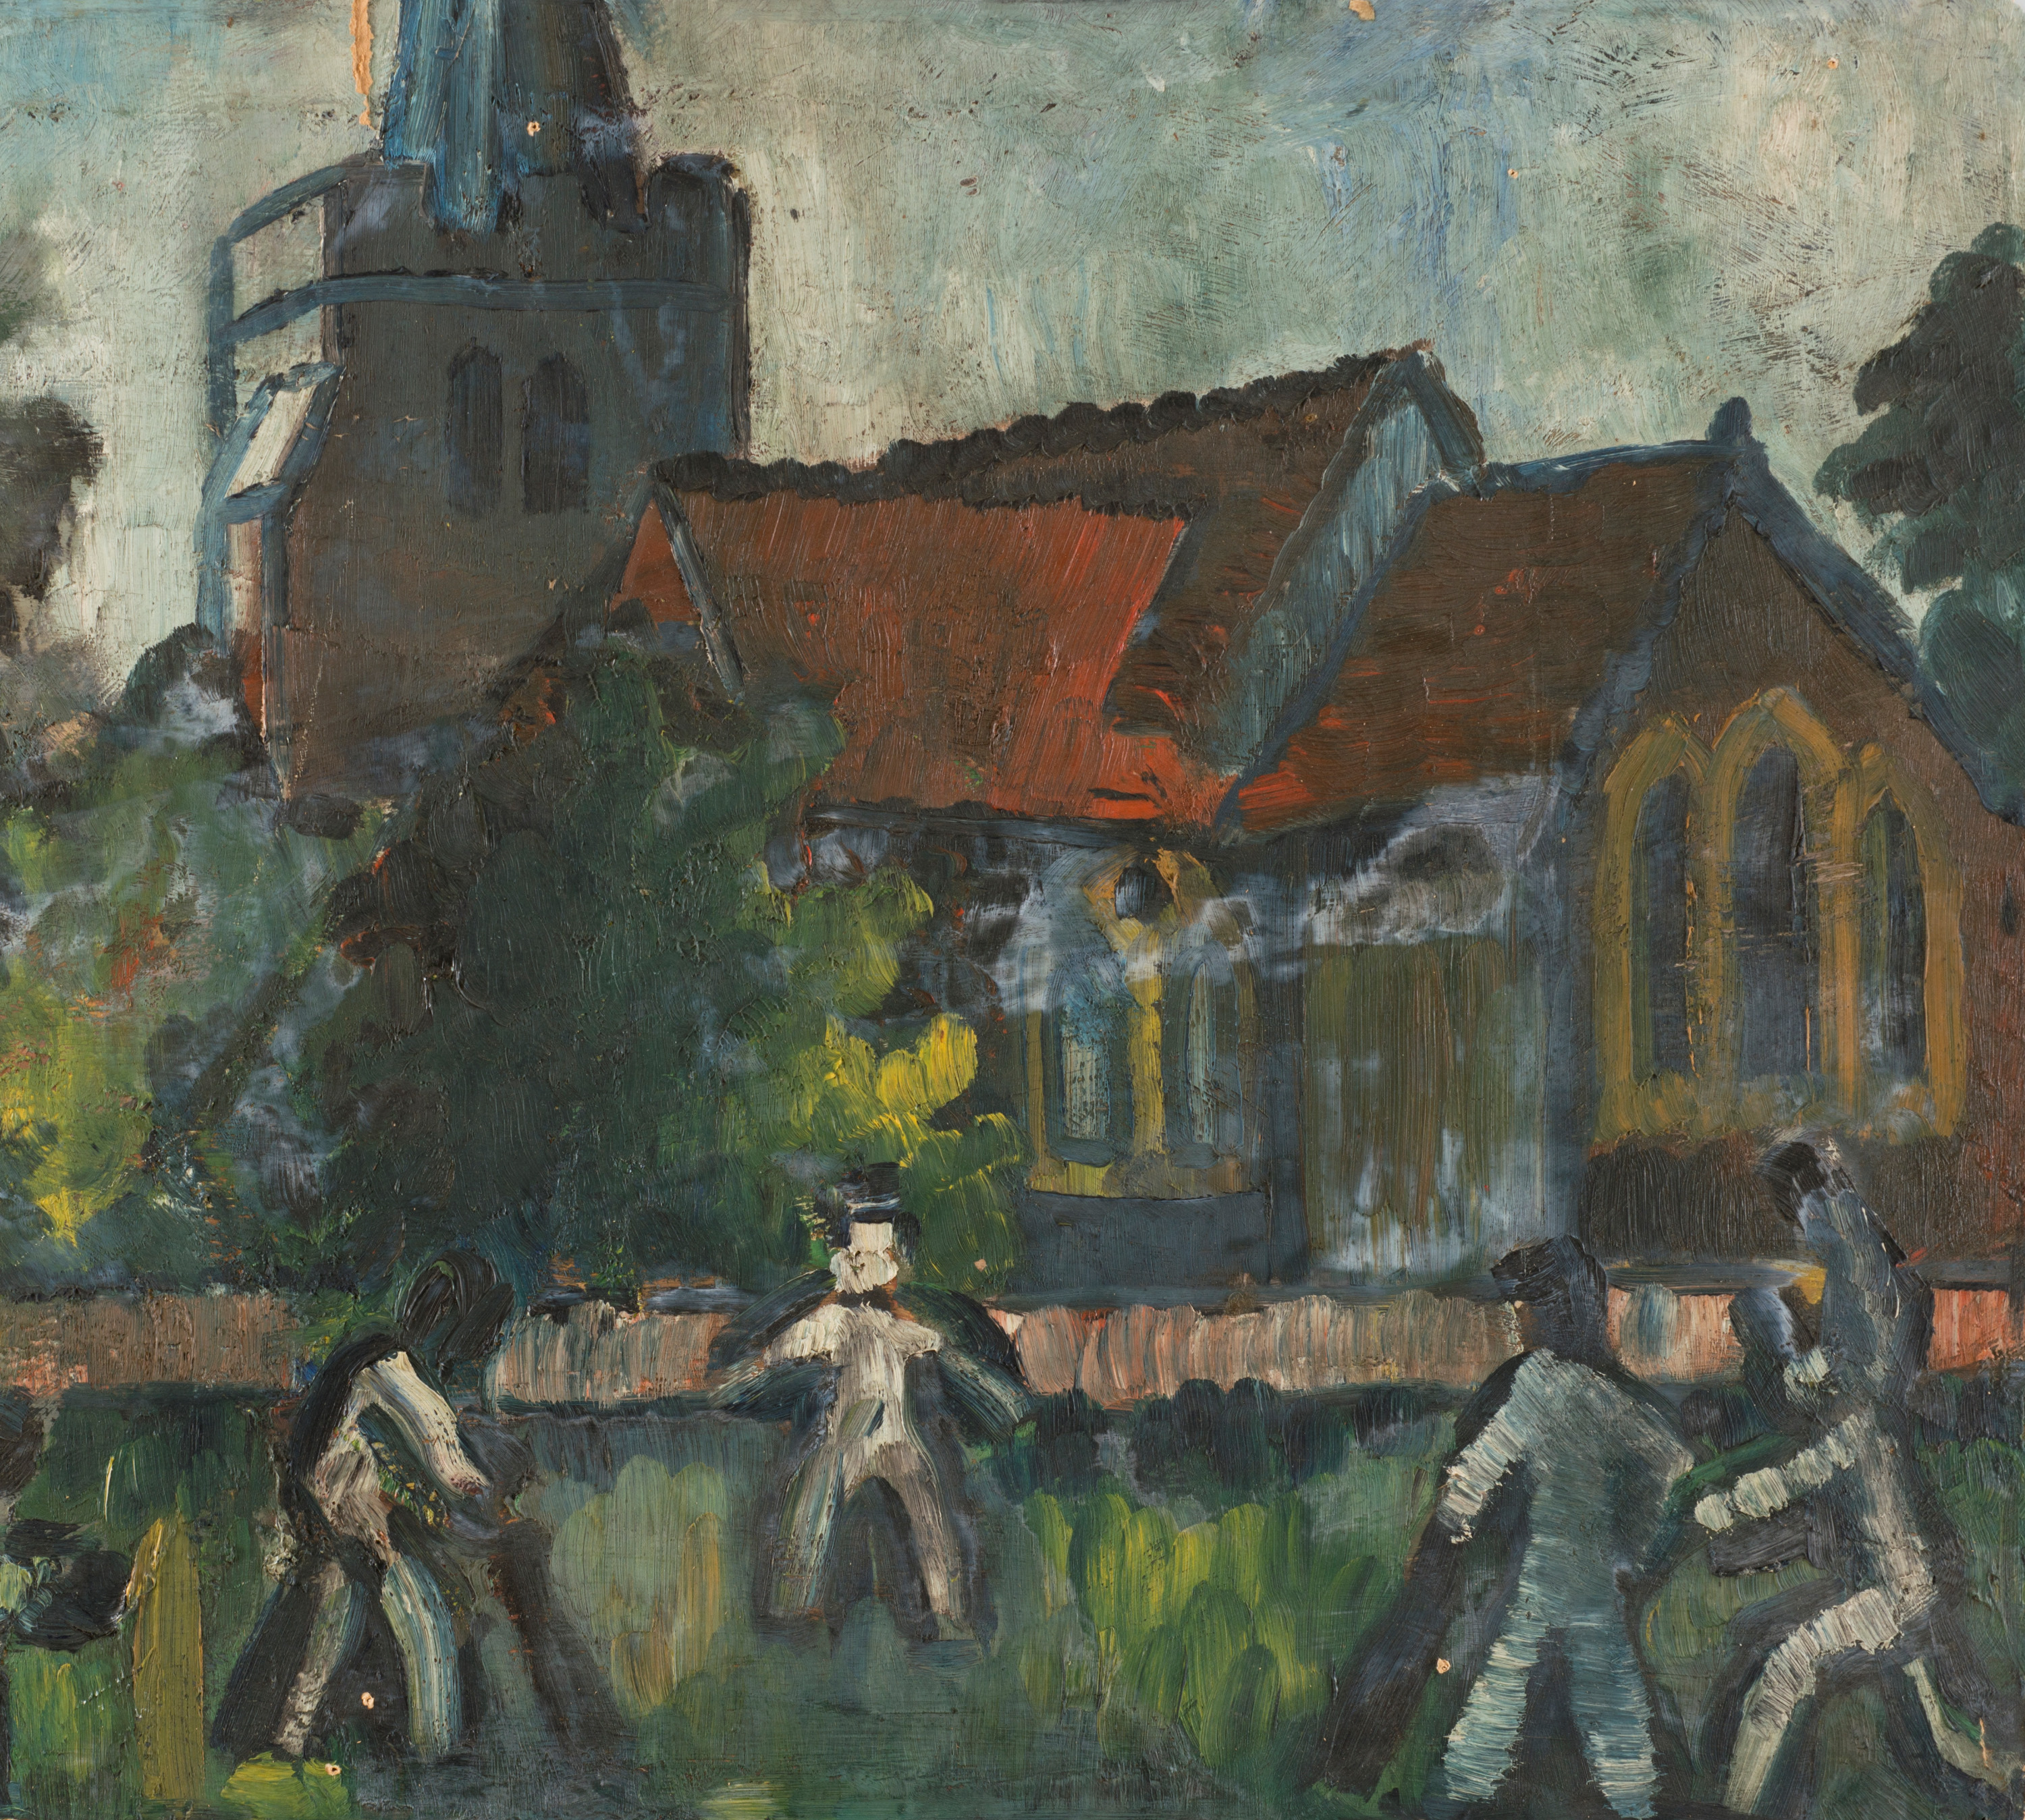 <p><strong>David Gommon</strong><br />
<em>Boys Playing Cricket</em><br />
Auckland Art Gallery Toi o Tāmaki&nbsp;<br />
gift of Lucy Wertheim, 1948</p>
